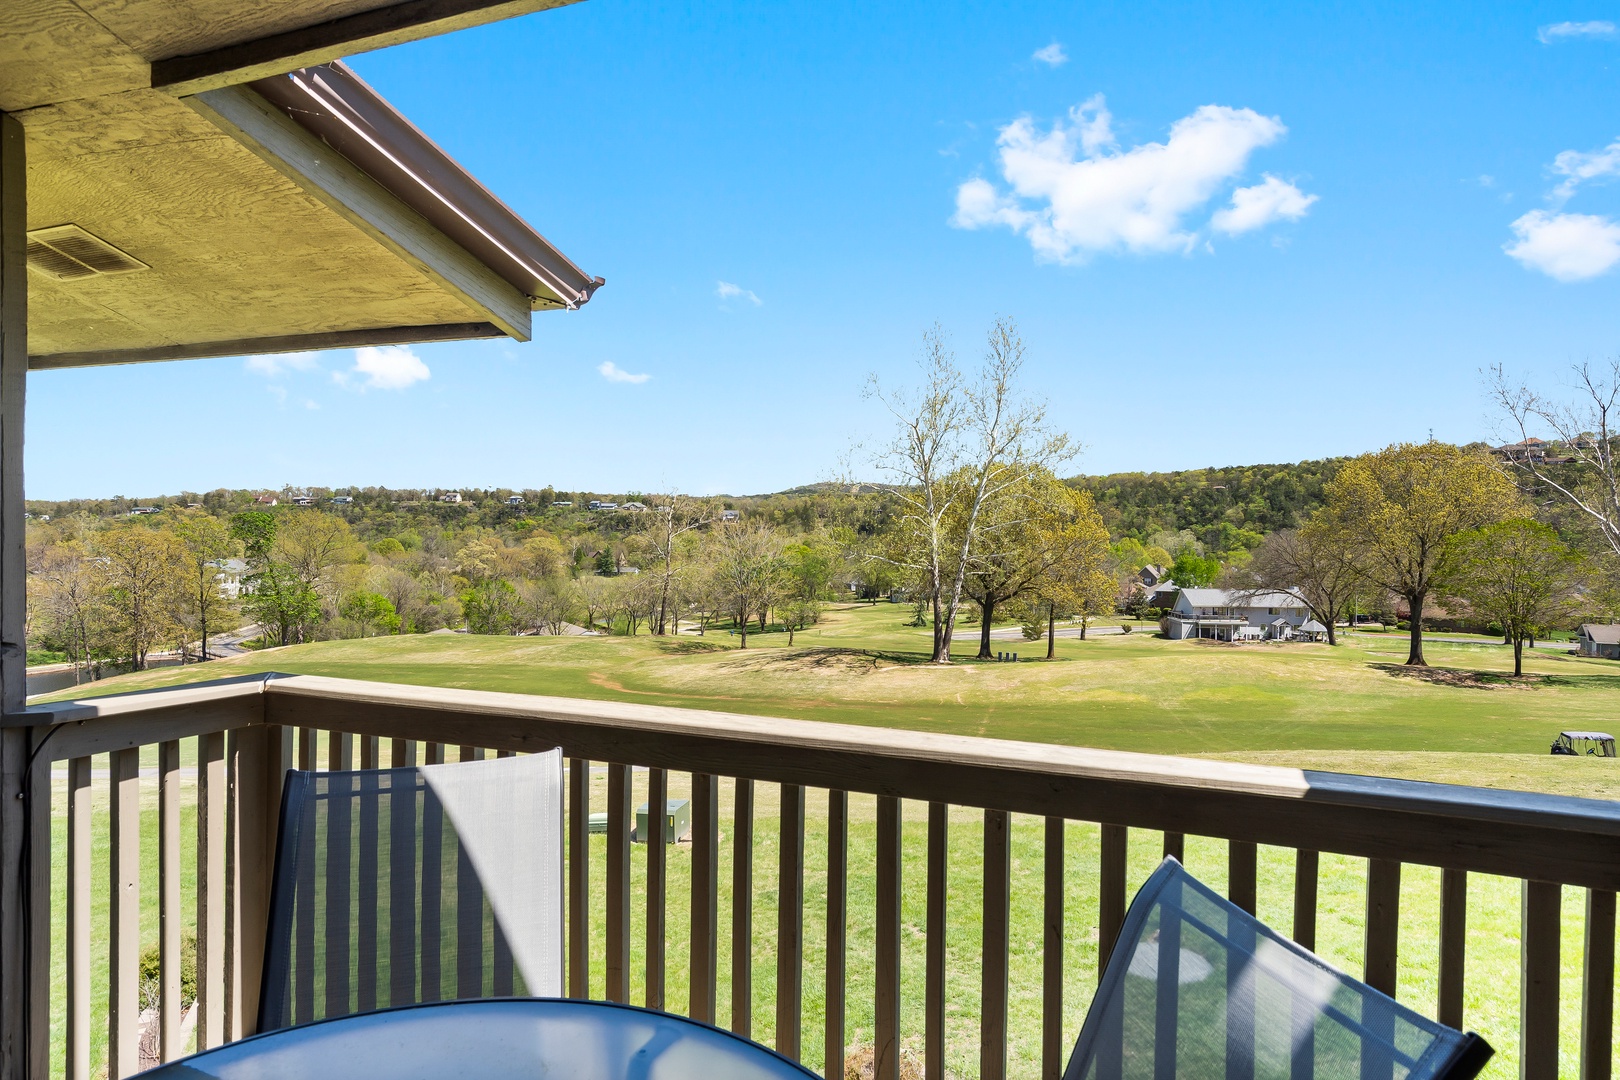 Kick back & relax or dine alfresco on the balcony with golf course views!